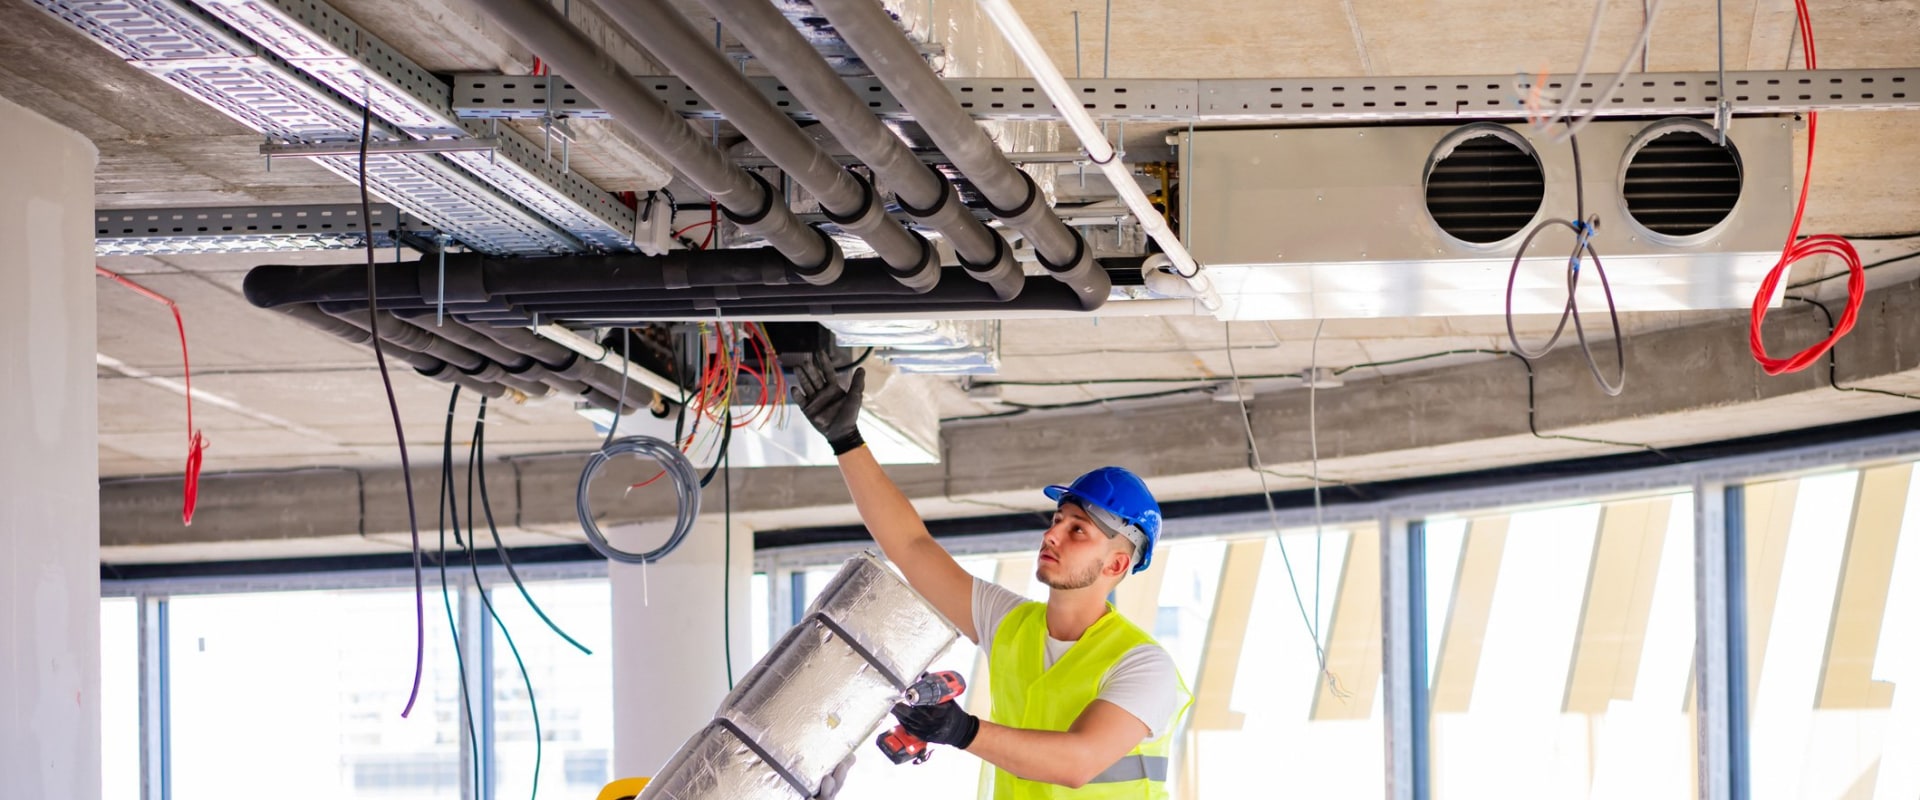 How Long Does It Take to Become an Expert HVAC Maintenance Technician?